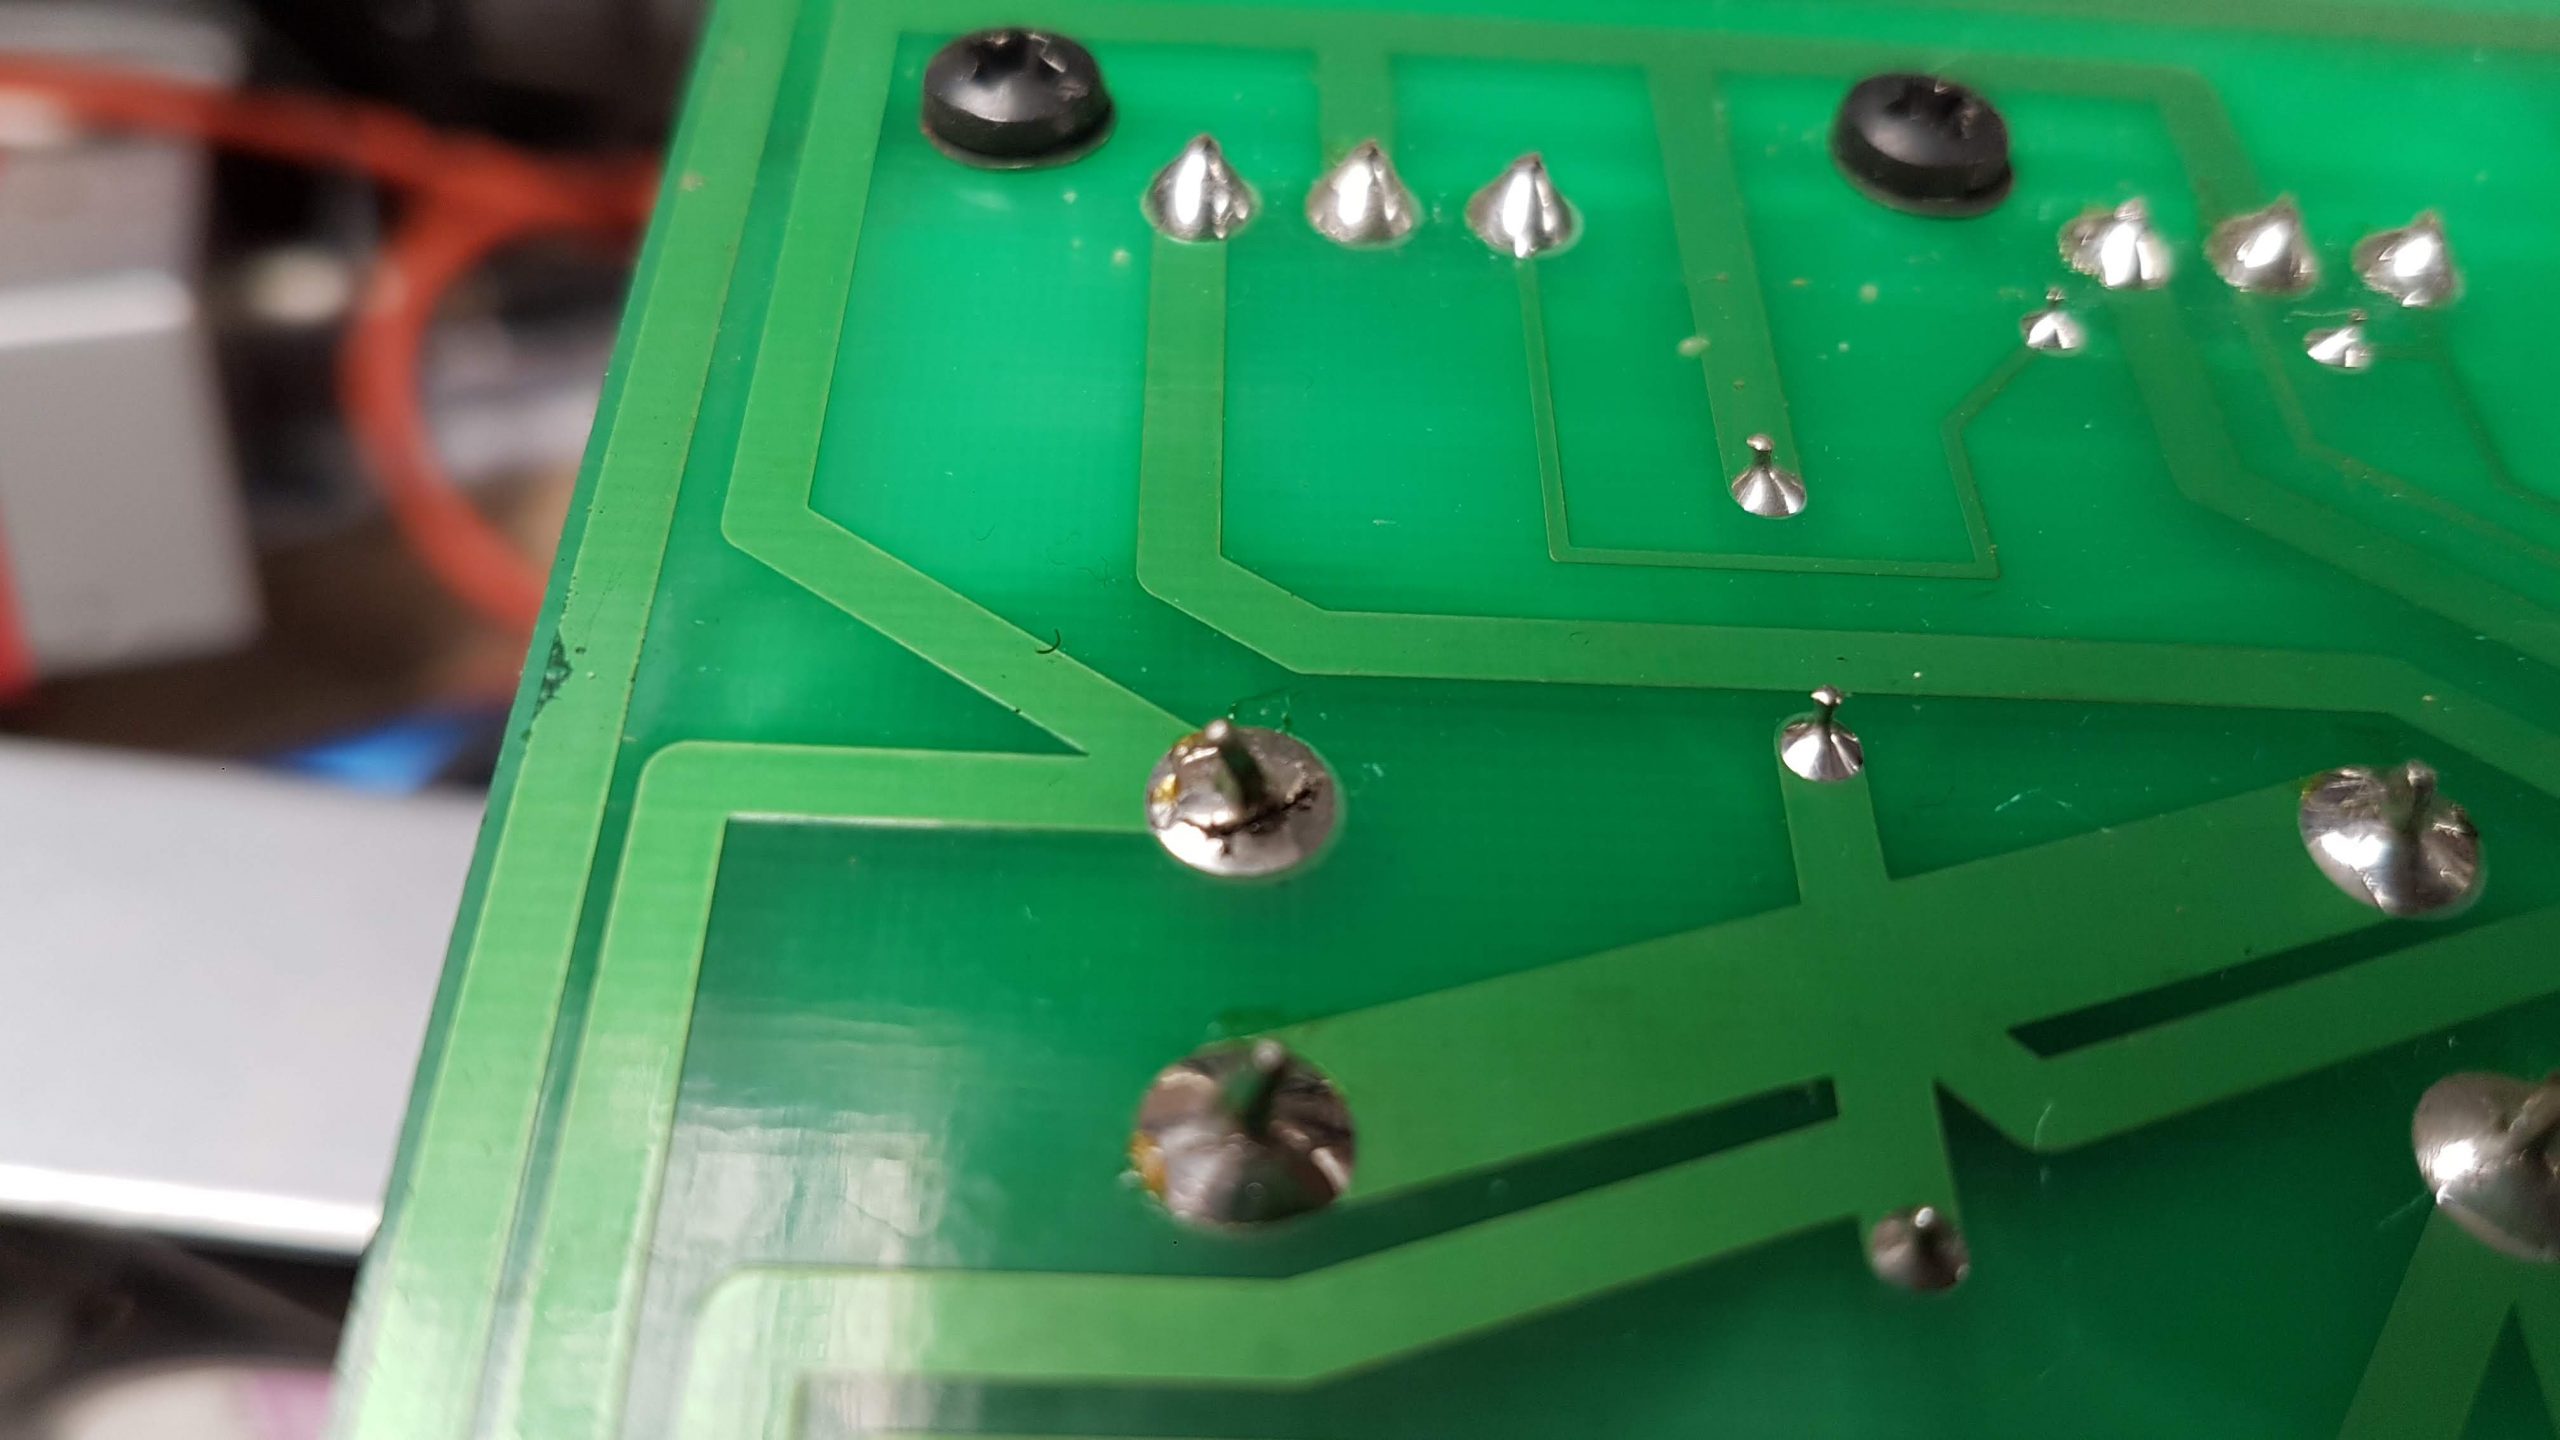 dry solder joint on PCB bass amplifier